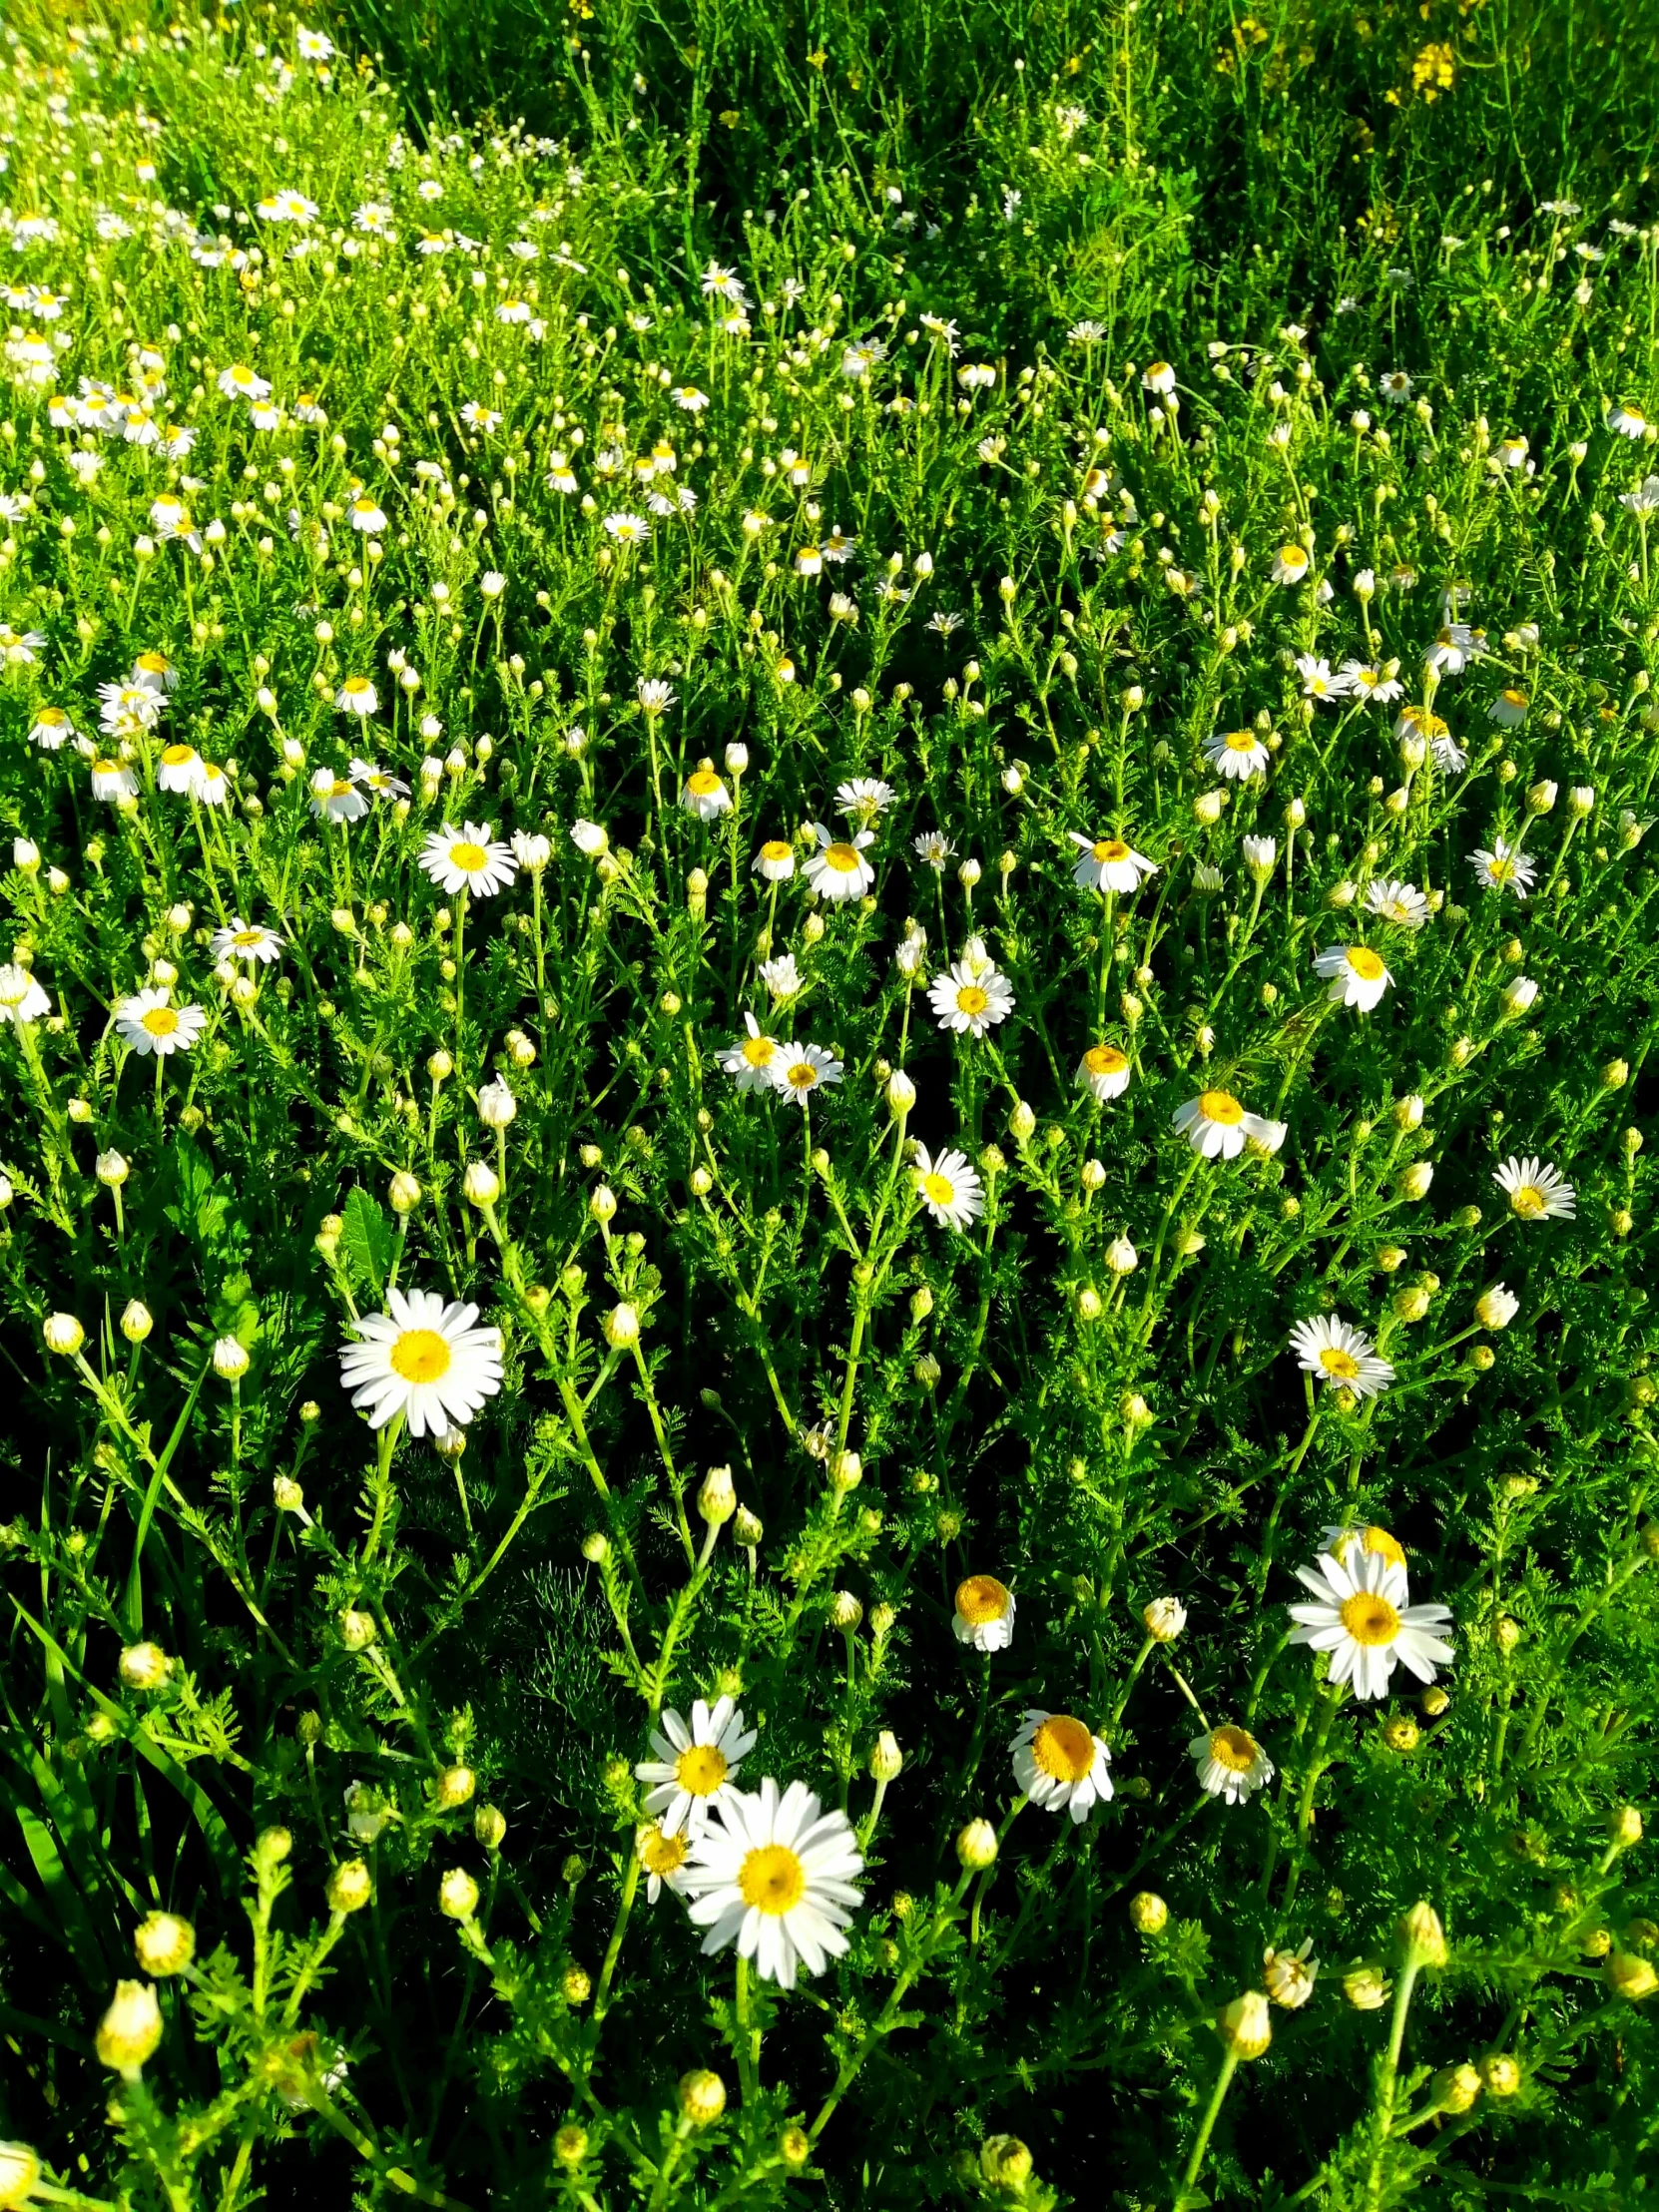 a field full of white flowers surrounded by tall grass